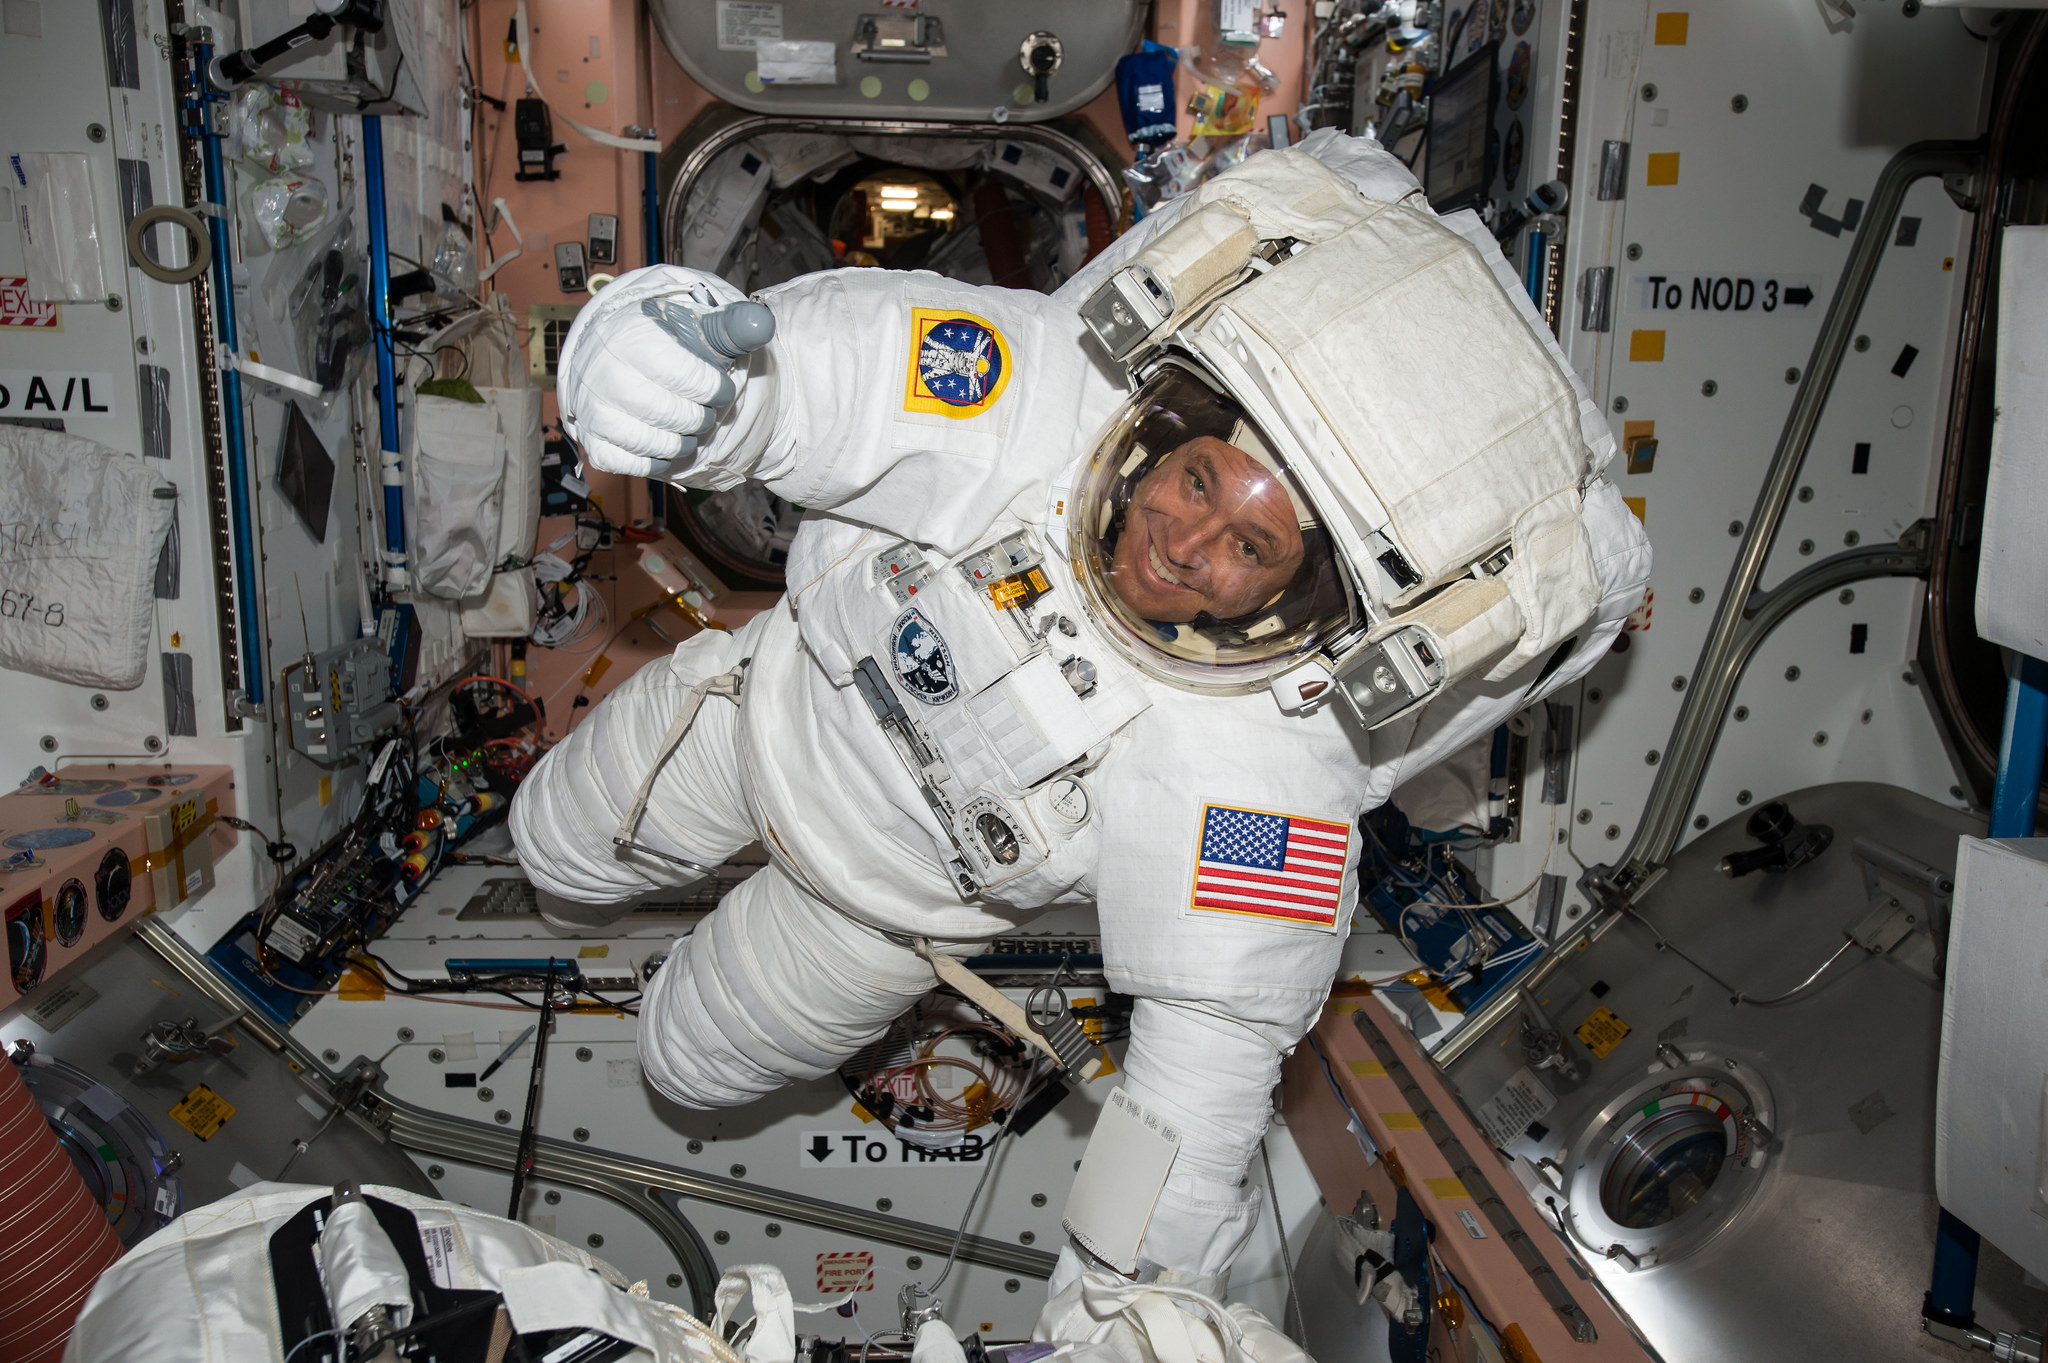 NASA astronaut Jack Fischer gives a thumbs-up sign while wearing an extravehicular mobility unit (EMU) spacesuit ahead of a May 12, 2017 spacewalk at the International Space Station.  Fischer and NASA astronaut Peggy Whitson will conduct a repair spacewalk on Tuesday, May 23